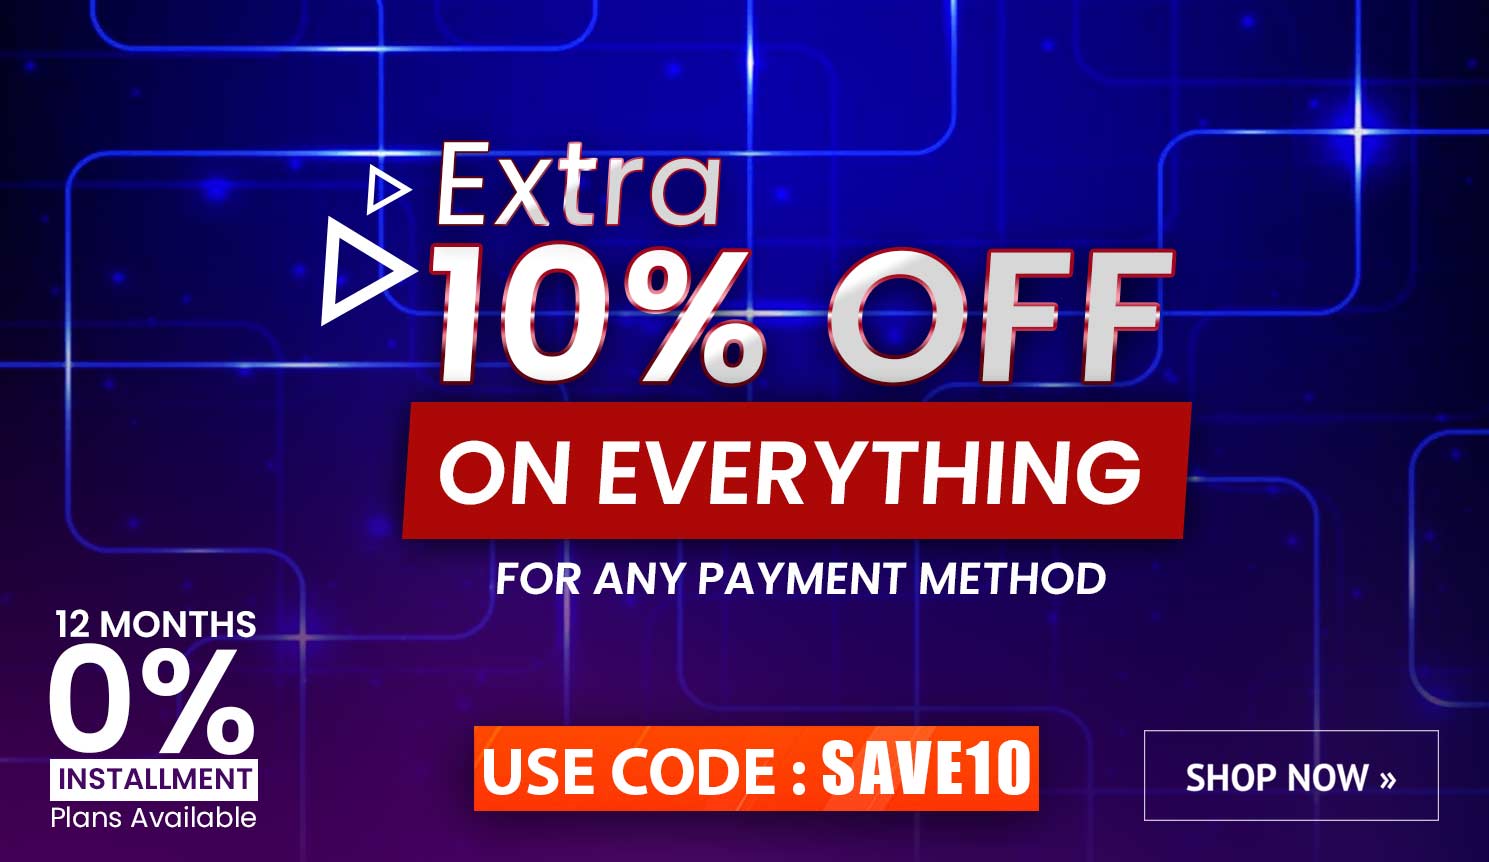 clickNshop.lk Enjoy extra 10% OFF On Everything For Any Payment Method at www.clicknshop.lk . Use code : SAVE10 at checkout to obtain your discount. Call us for more information 0115566111 T&C Apply